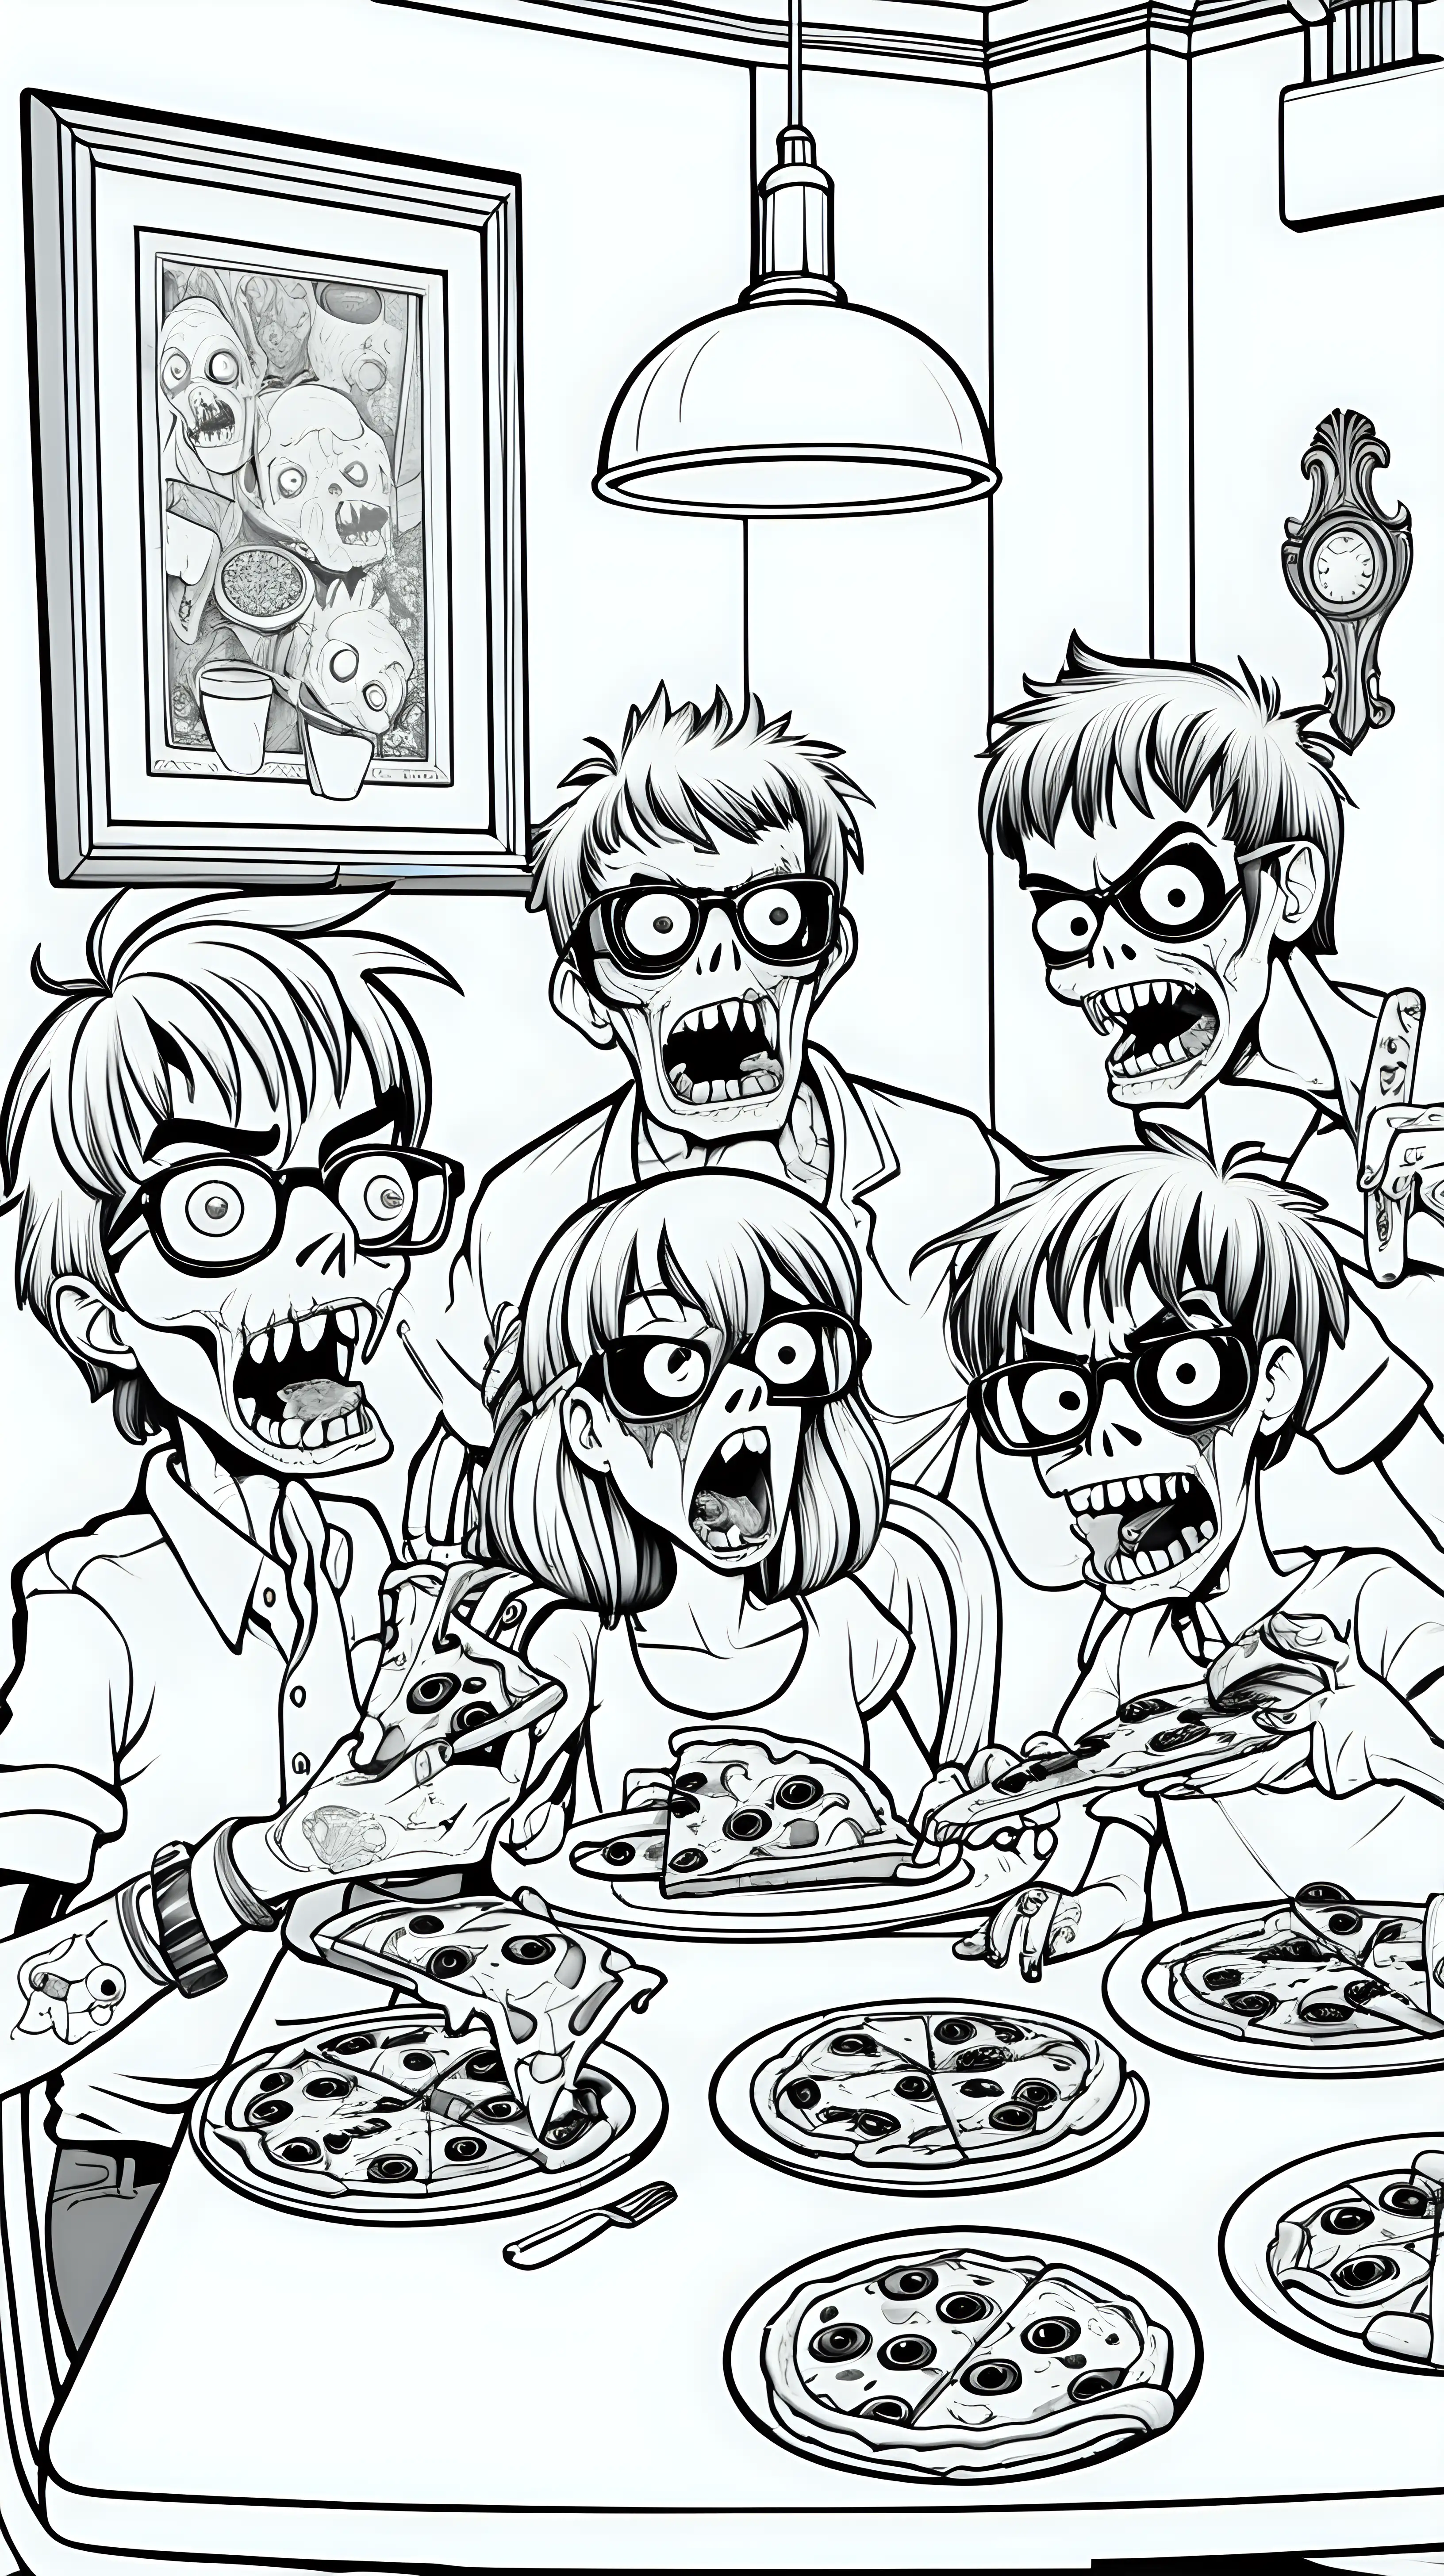 coloring book image, black and white image, of cute funny zombie family in dining room eating pizza with strechy cheese eyeballs